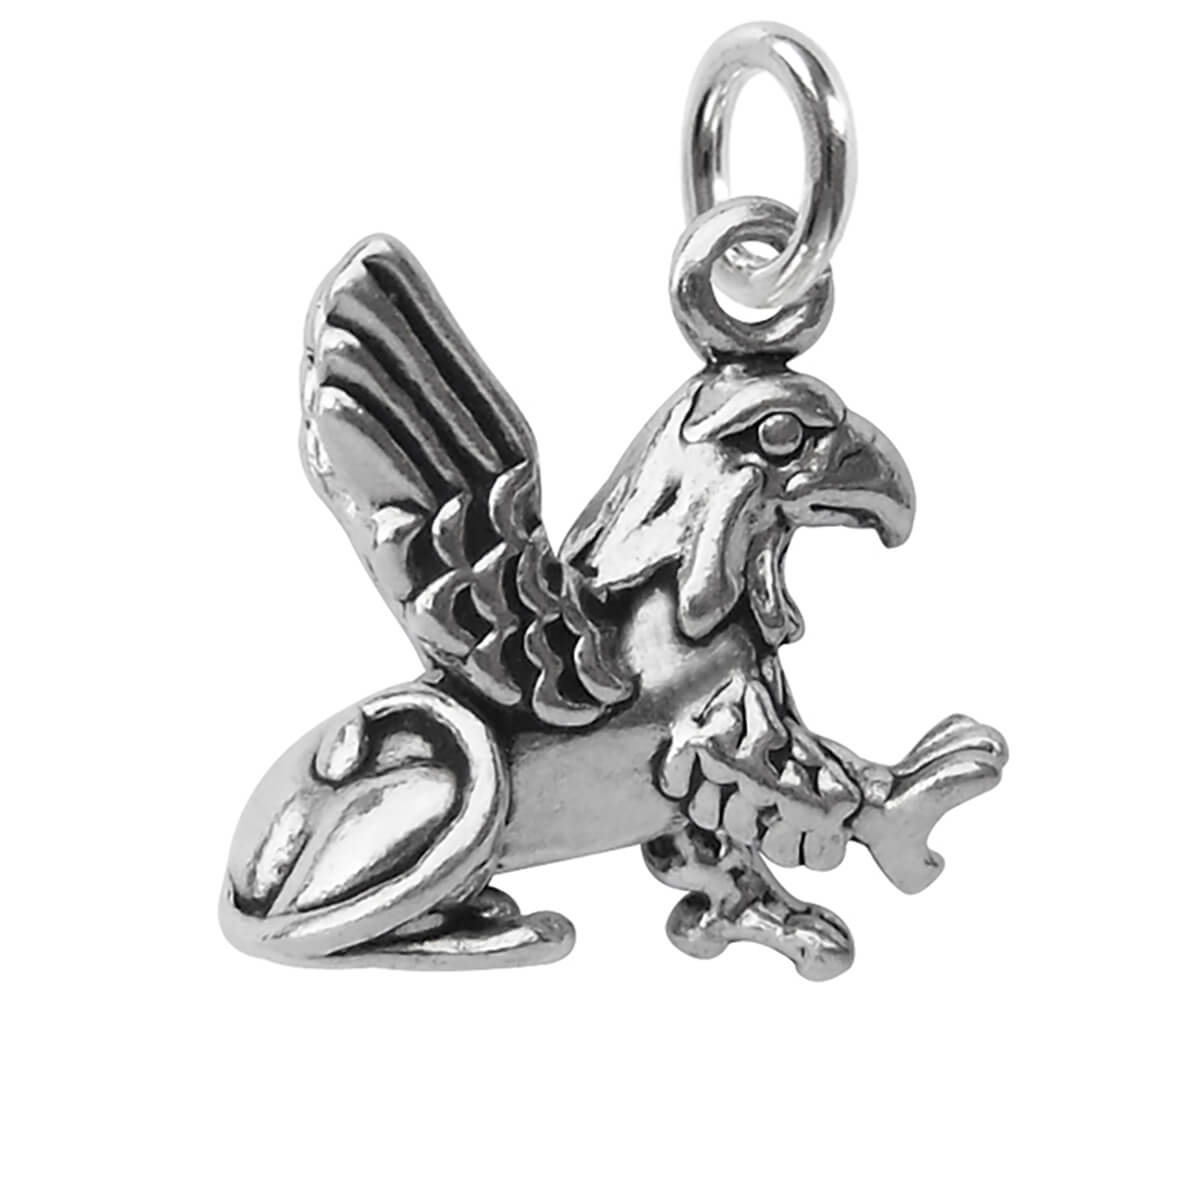 Griffin Charm Sterling Silver Heraldic Pendant